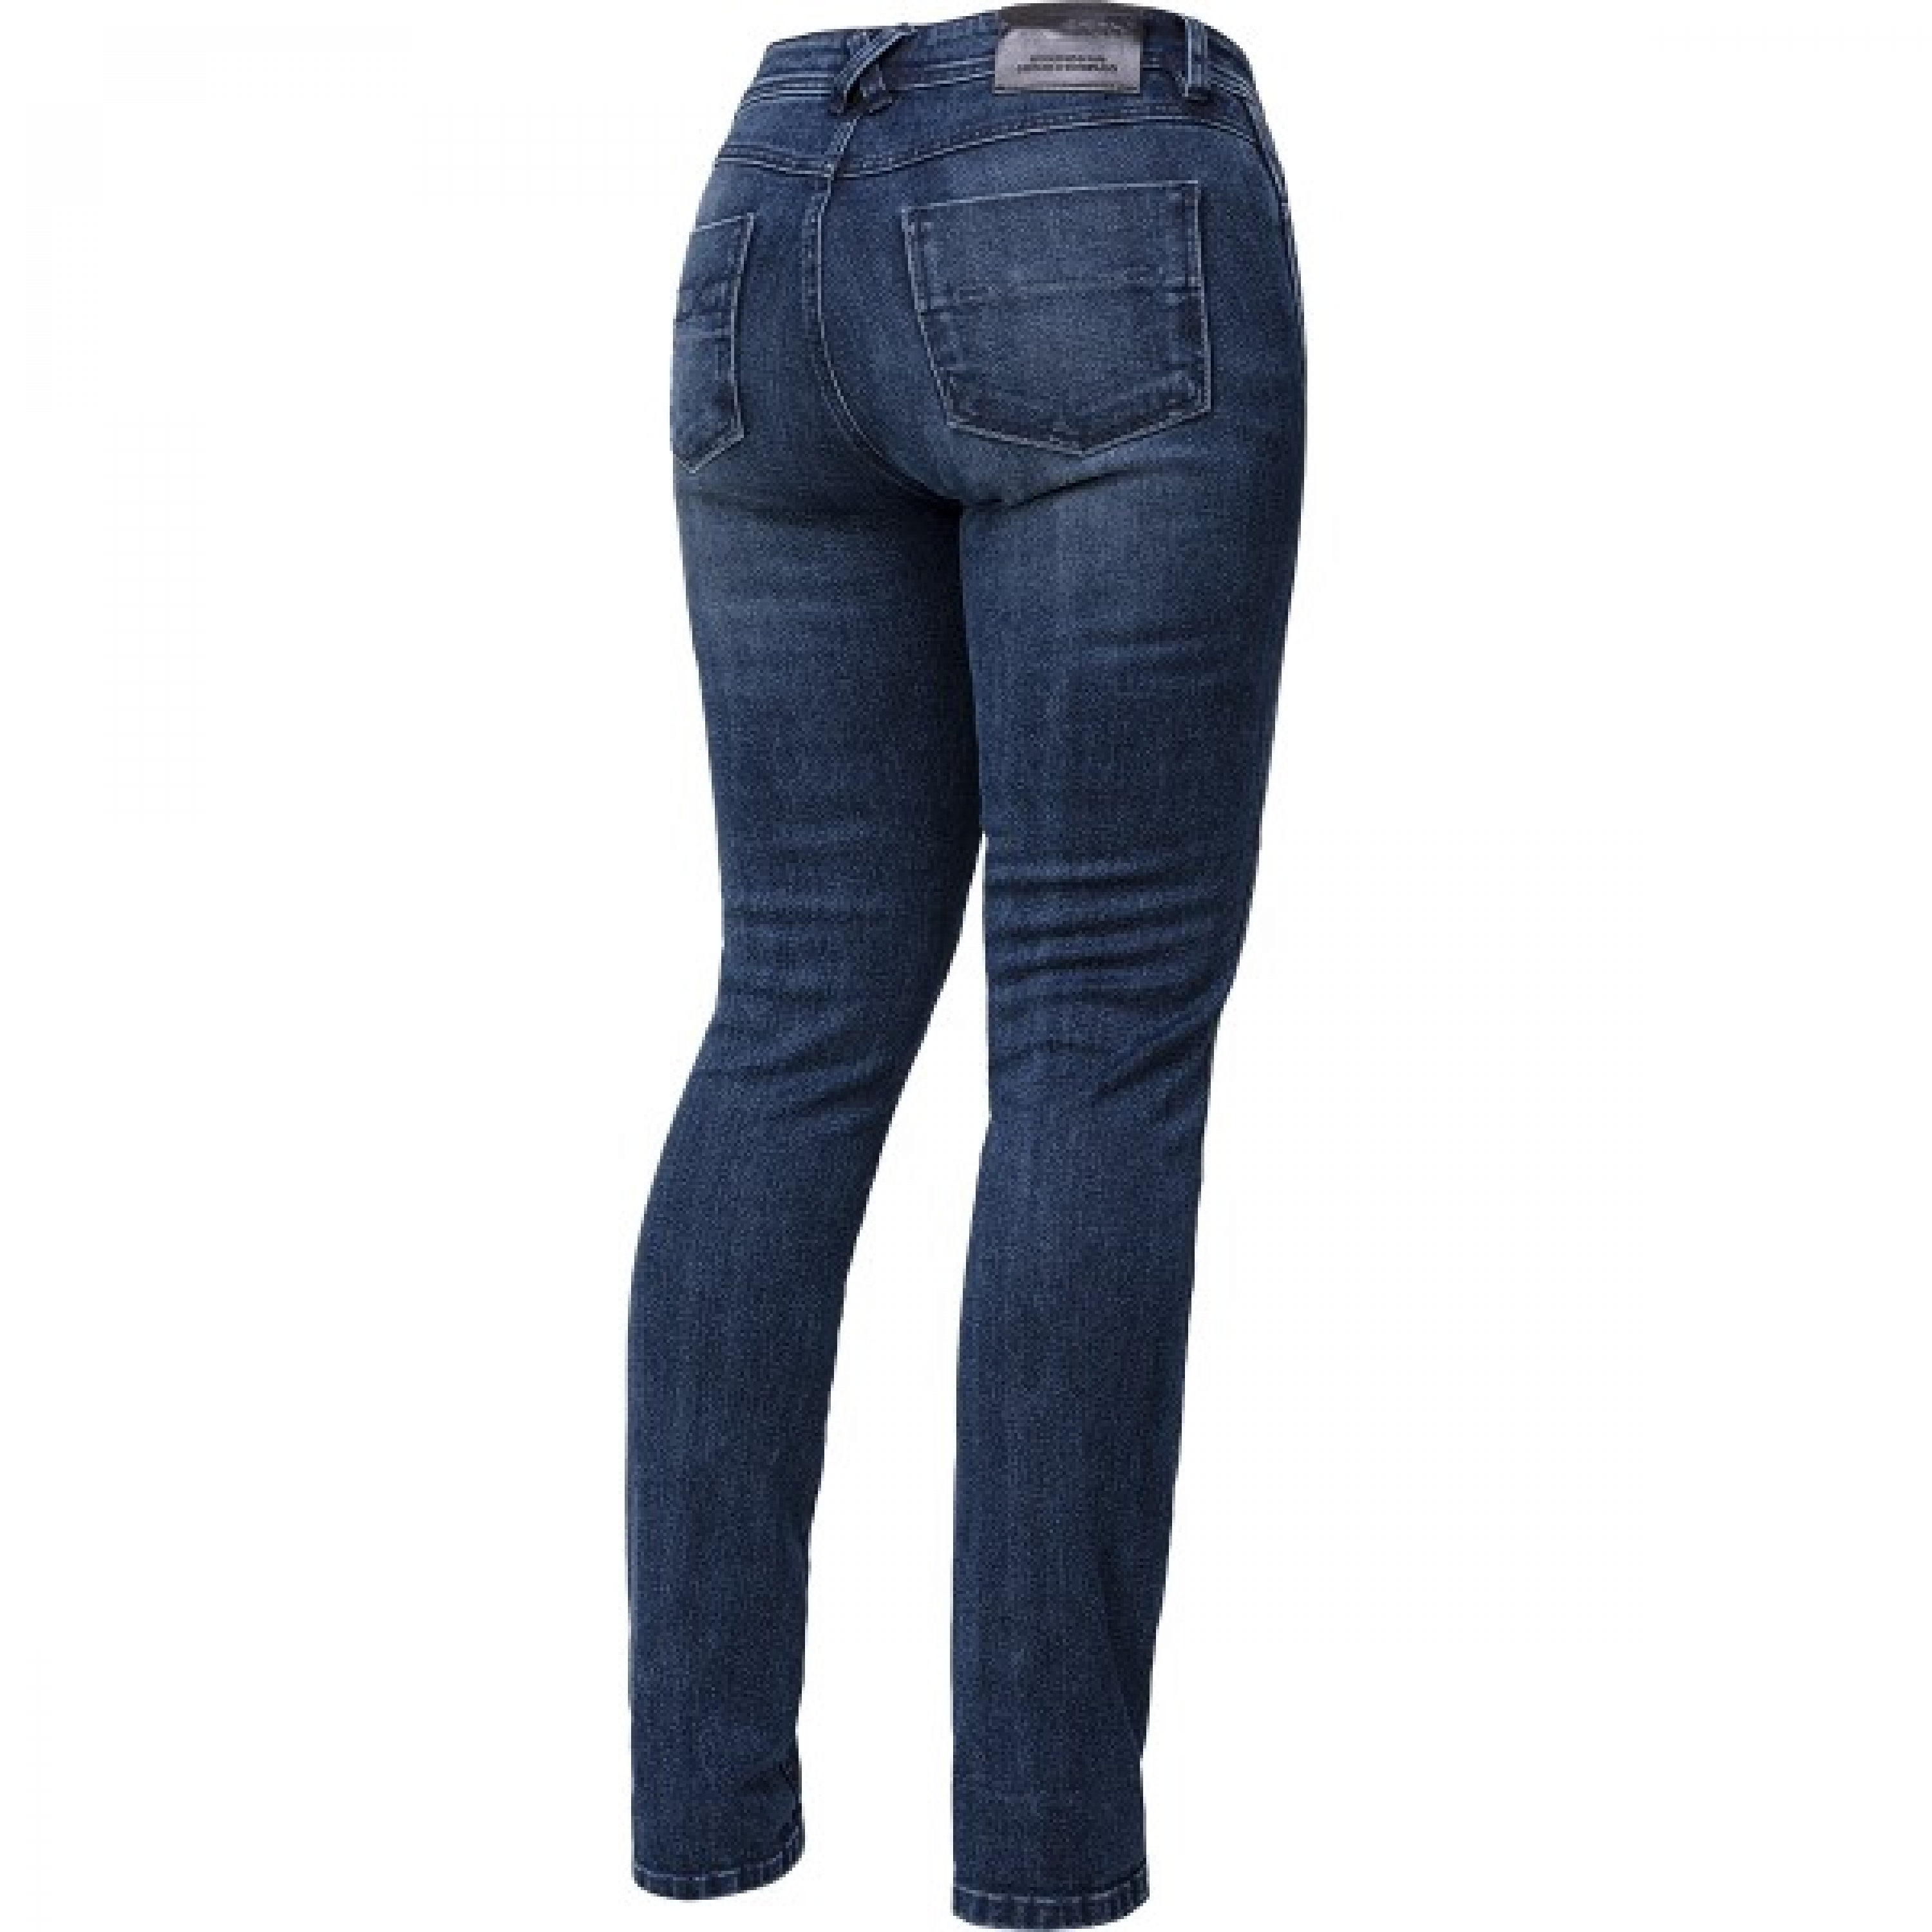 iXS "Cassidy" Womens Jeans